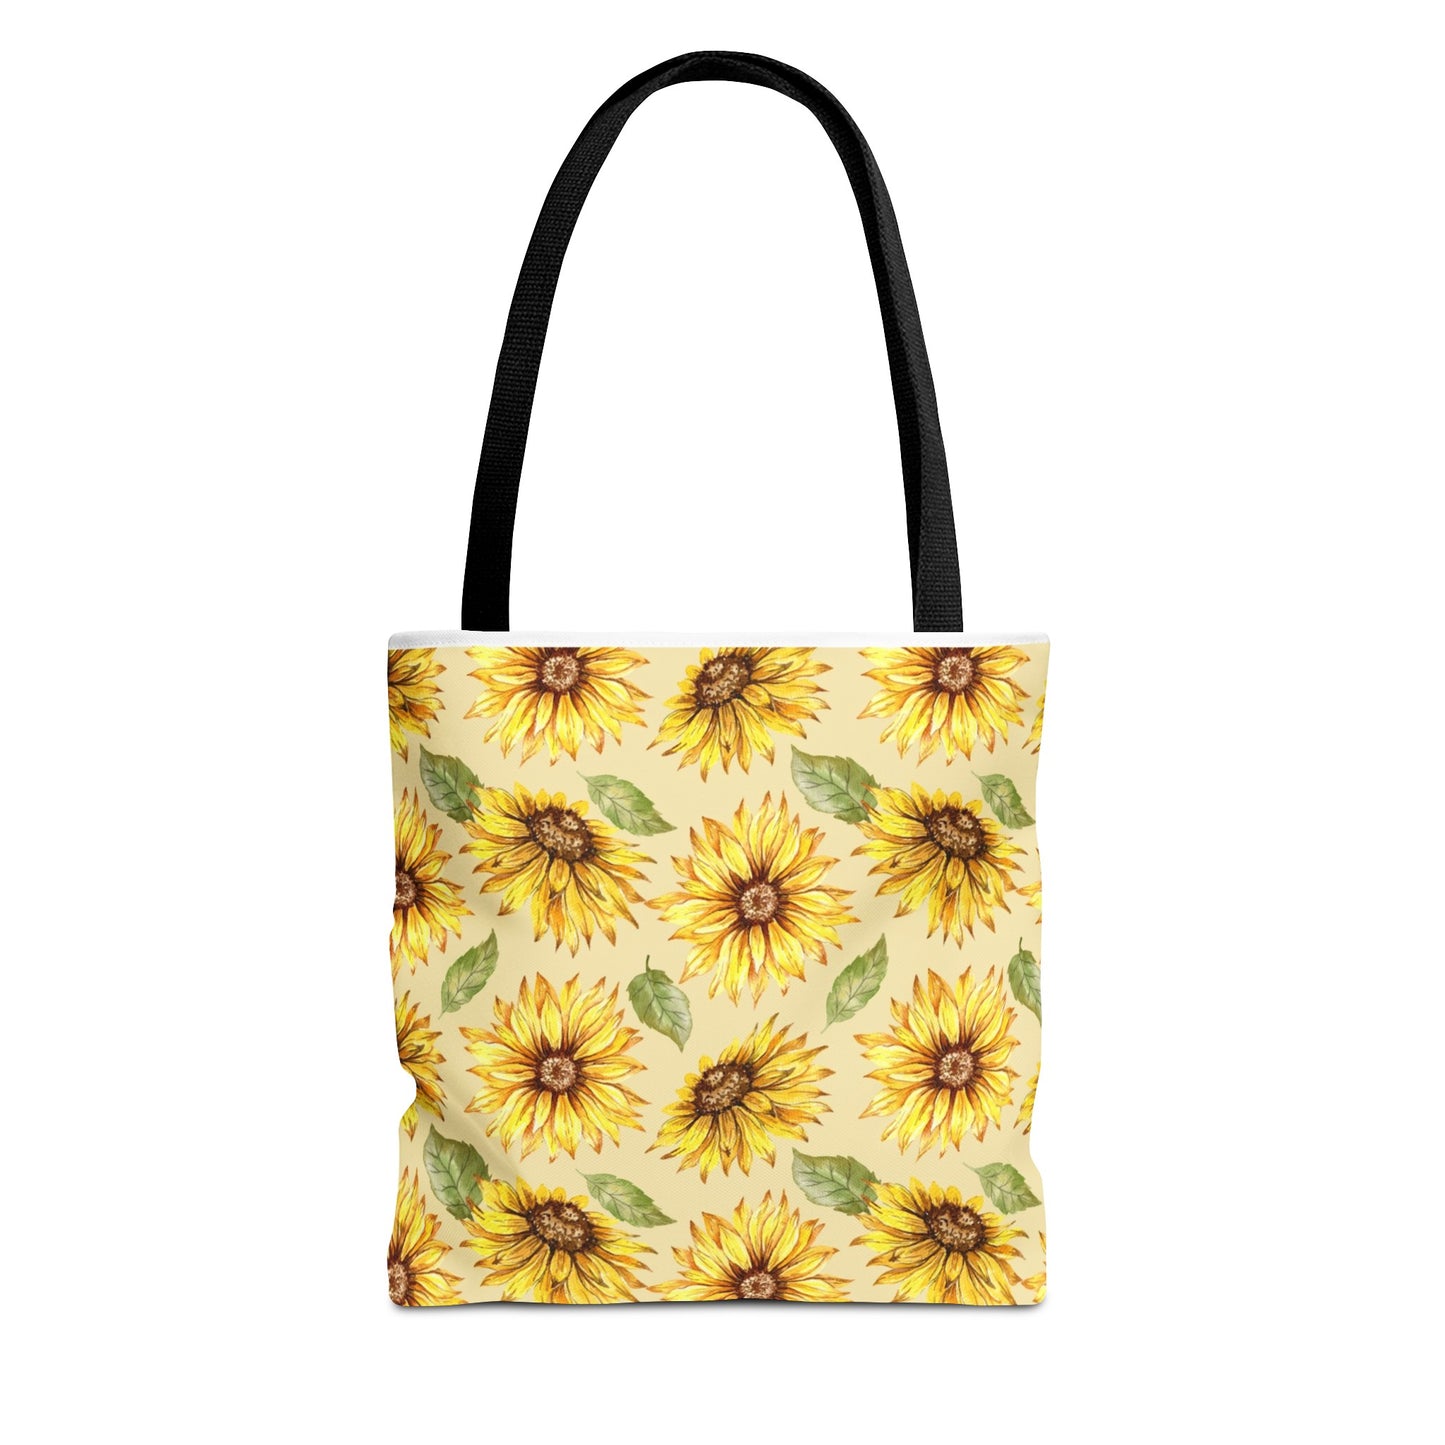 A Printify polyester tote bag with a Yellow Floral pattern featuring sunflowers on a yellow background, and black handles.